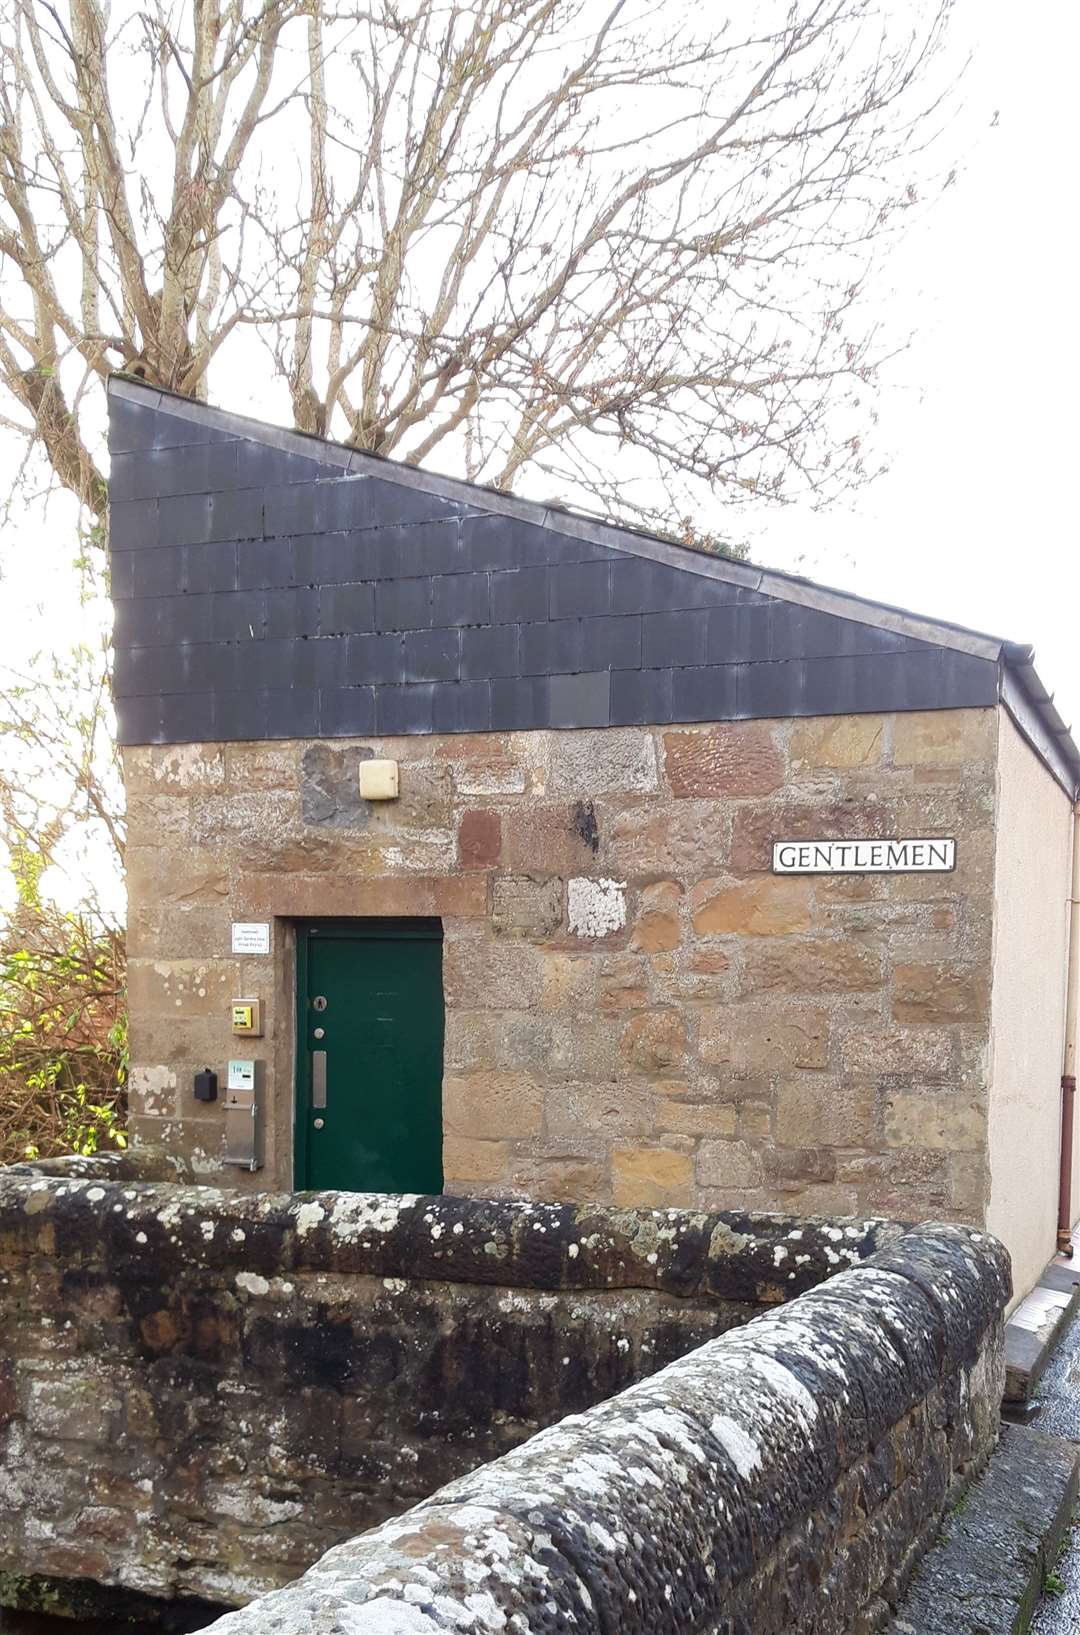 The public toilets at Dornoch have been substantially renovated.